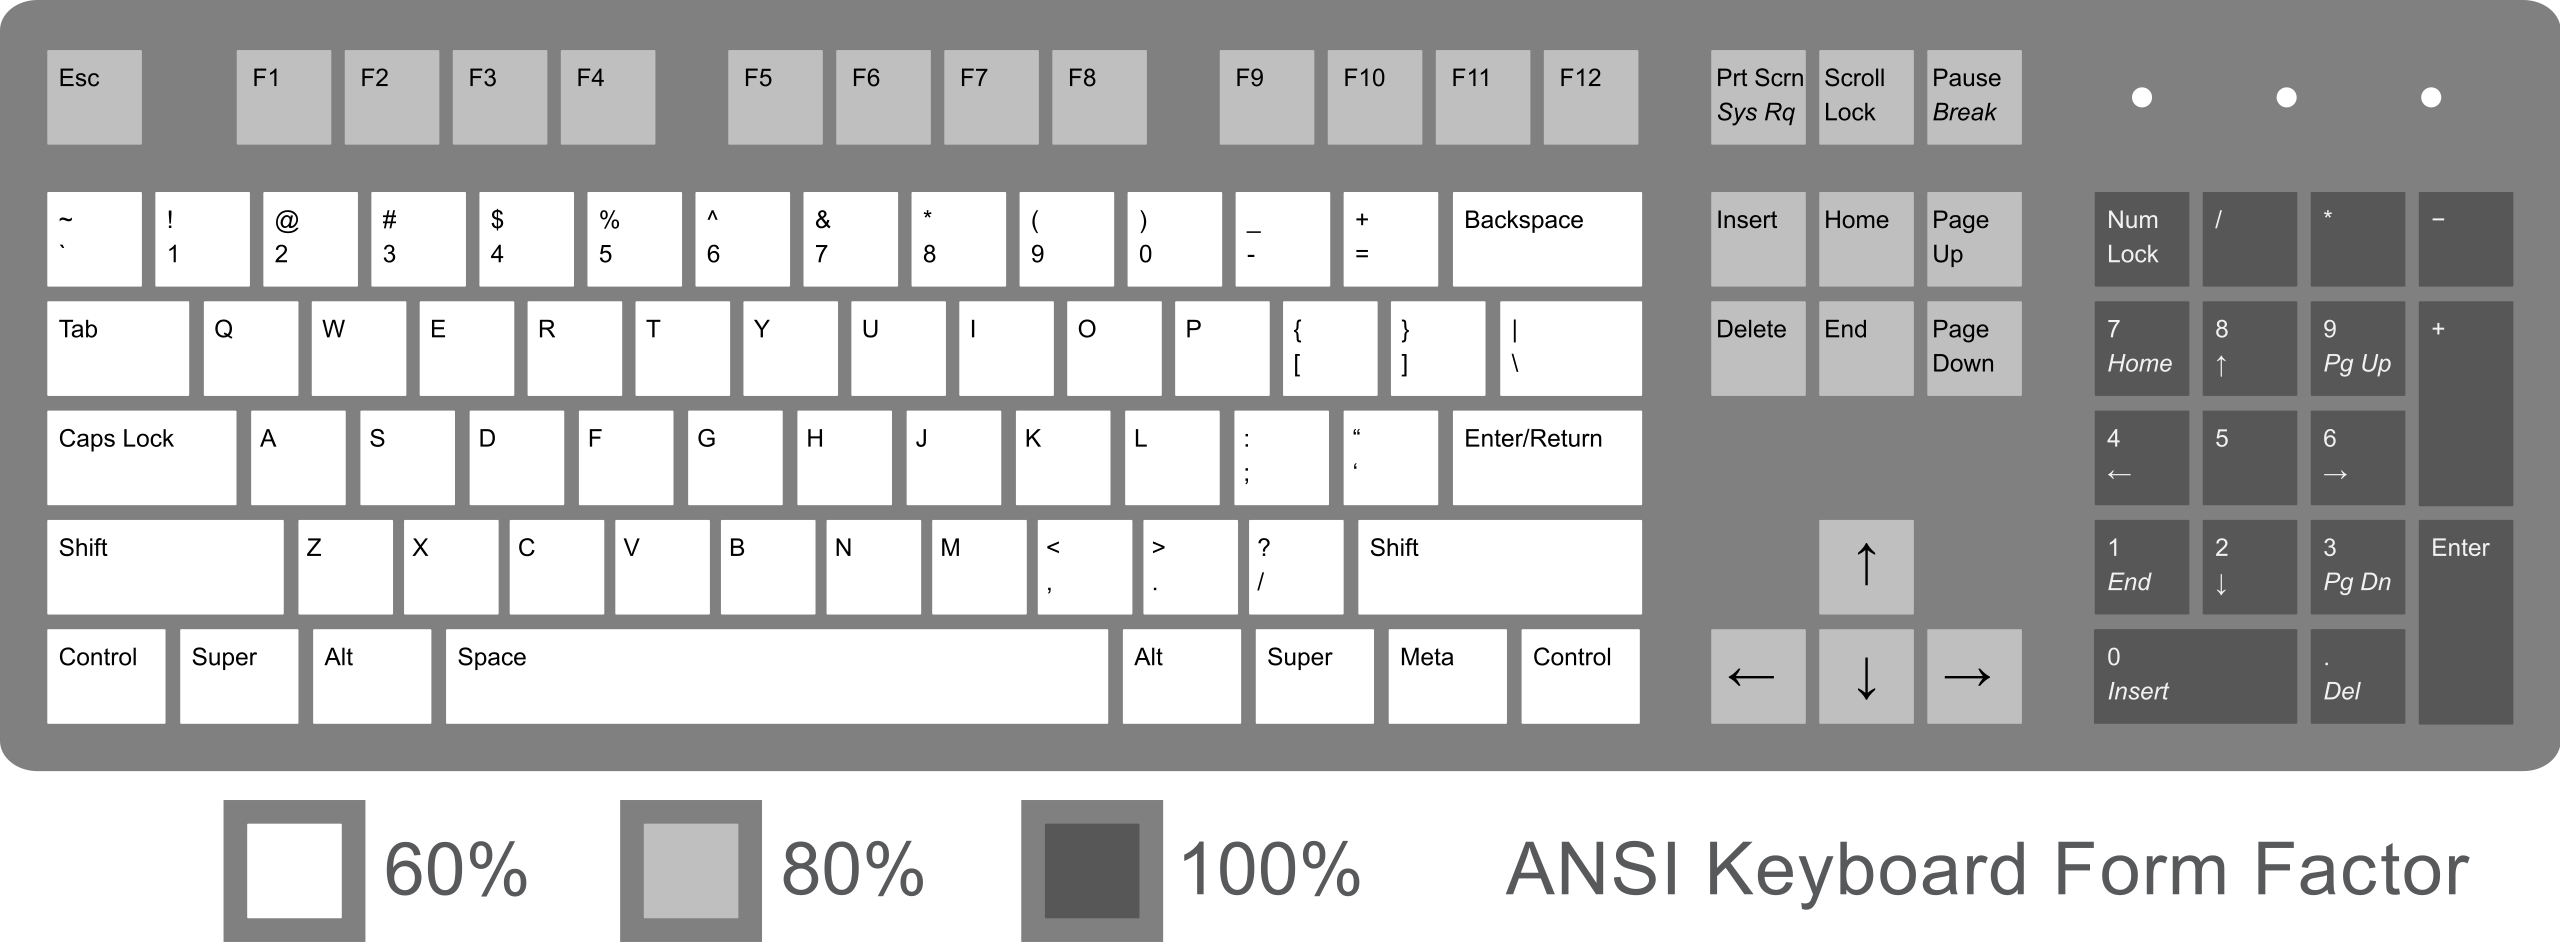 2560px-ANSI_Keyboard_Layout_Diagram_with_Form_Factor.svg.png